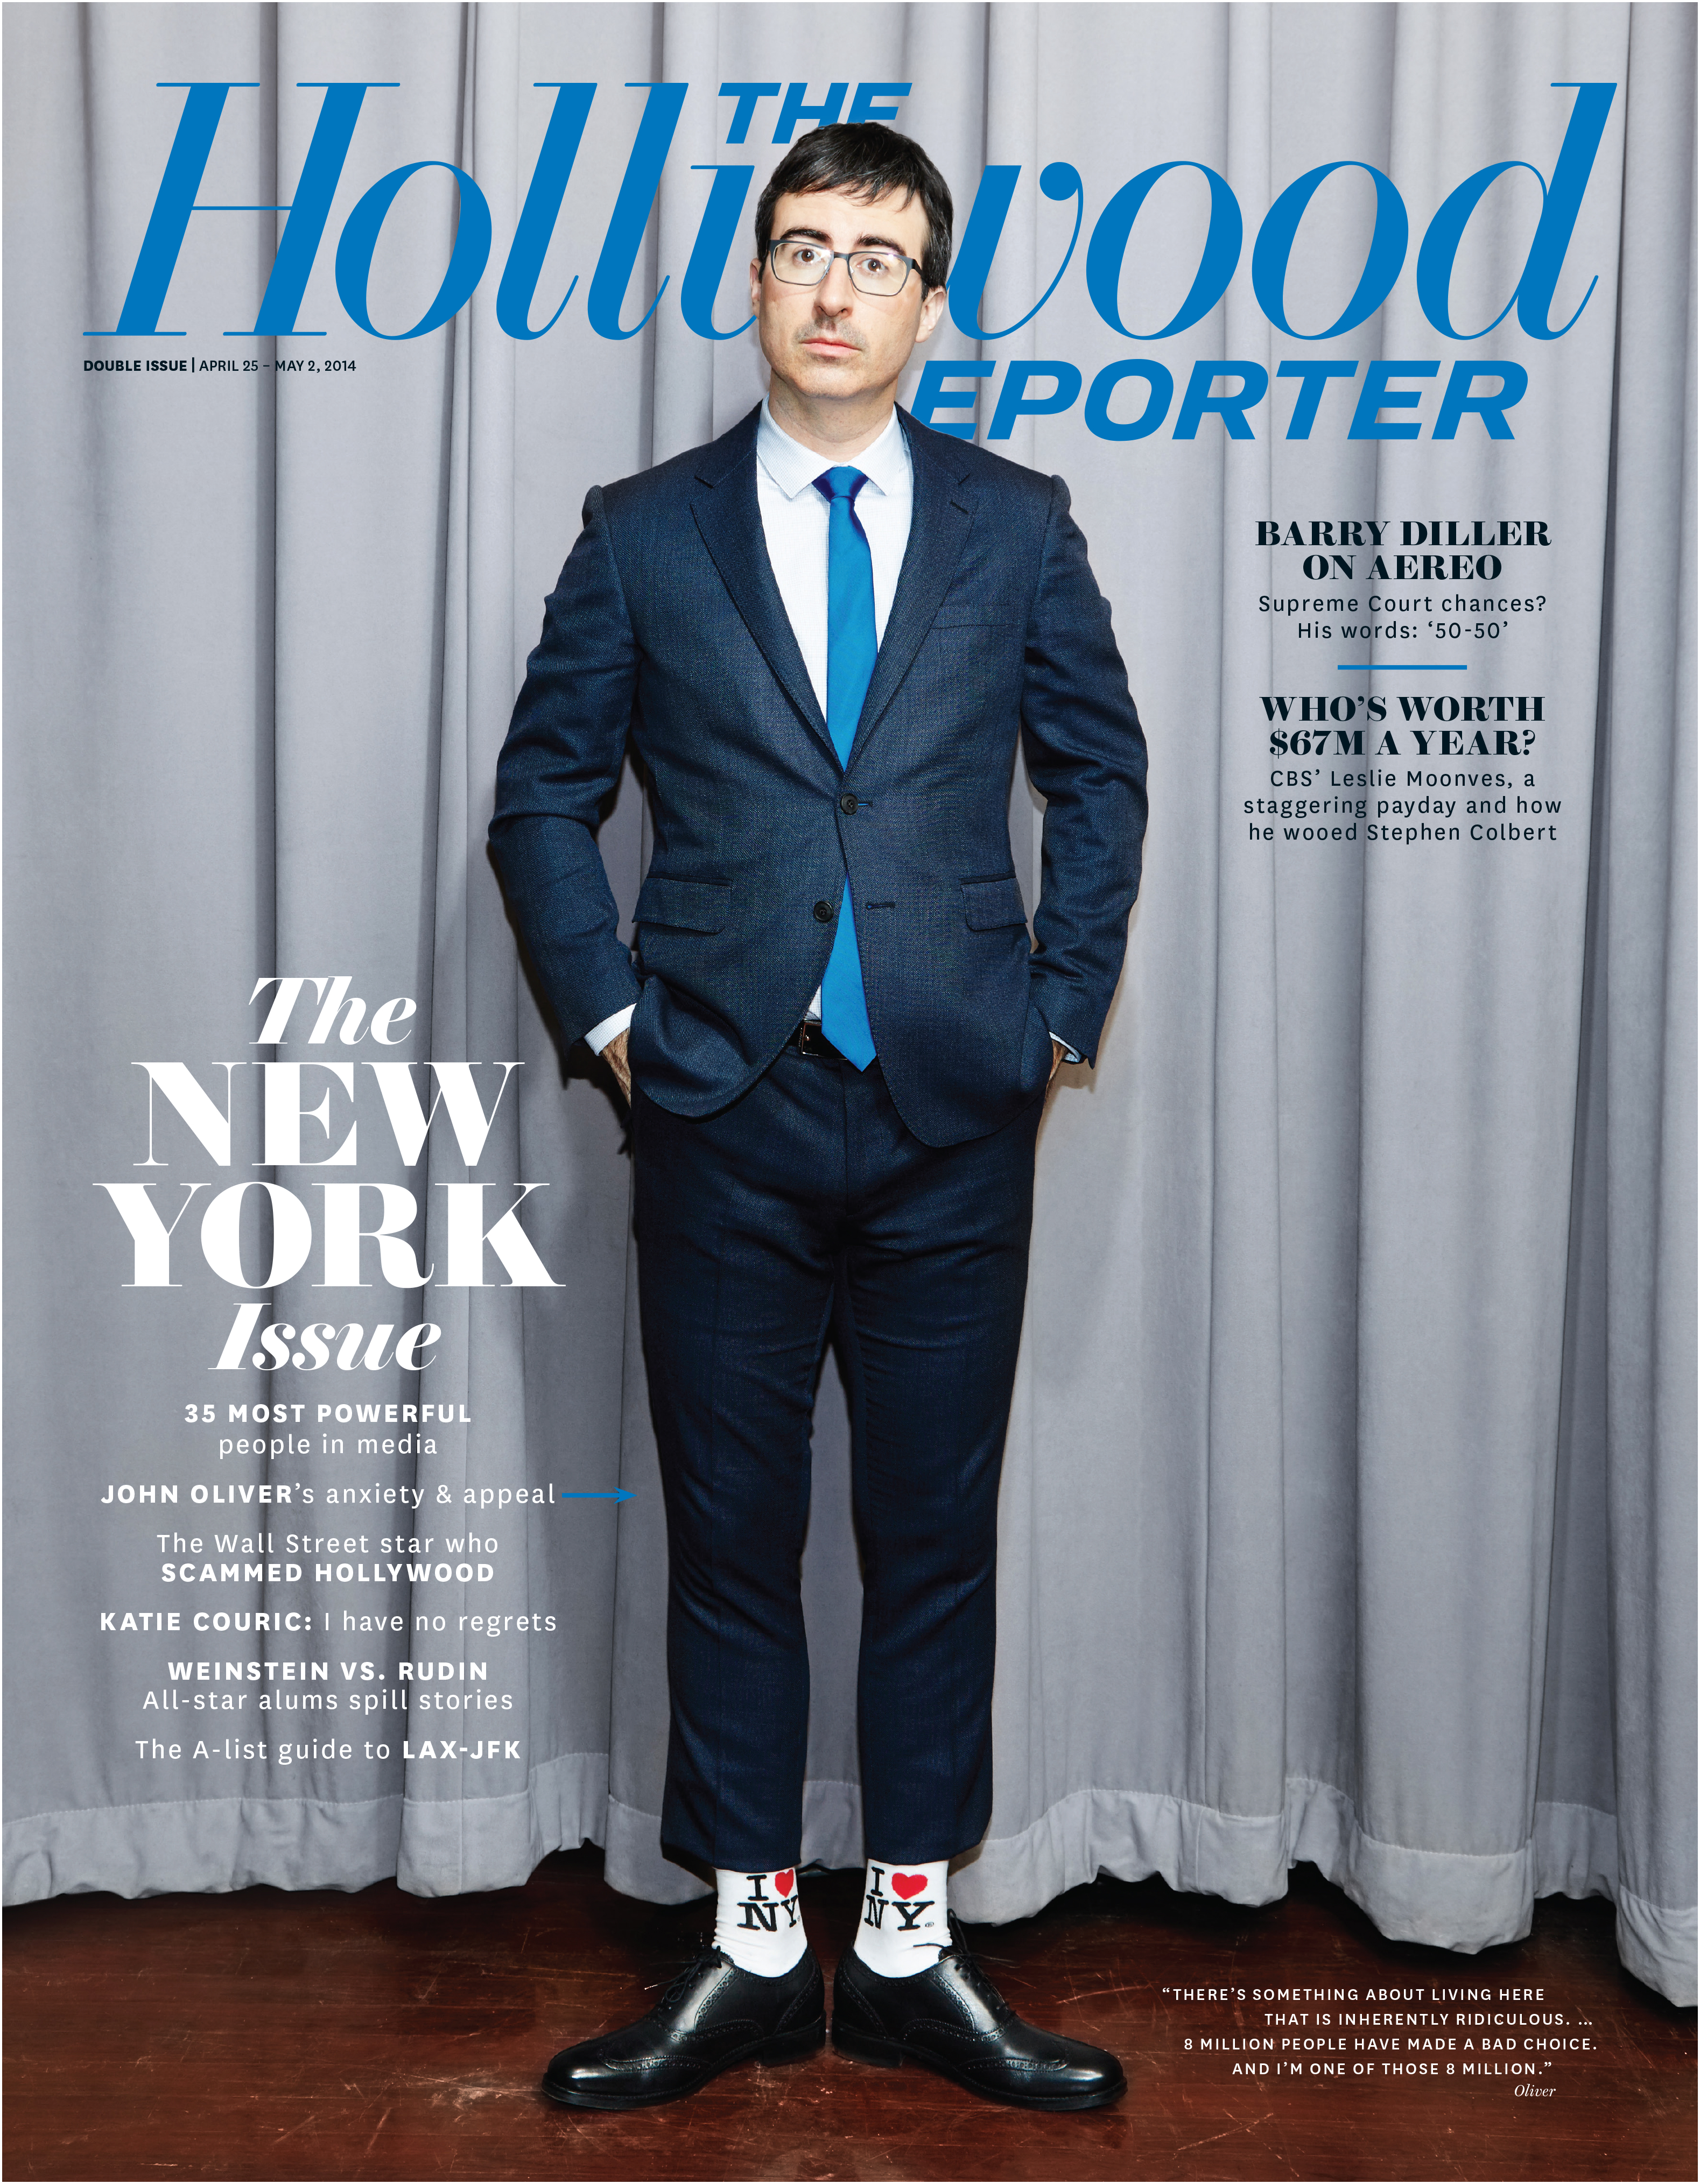 The Hollywood Reporter-April 25-May 2, 2014," The New York Issue"